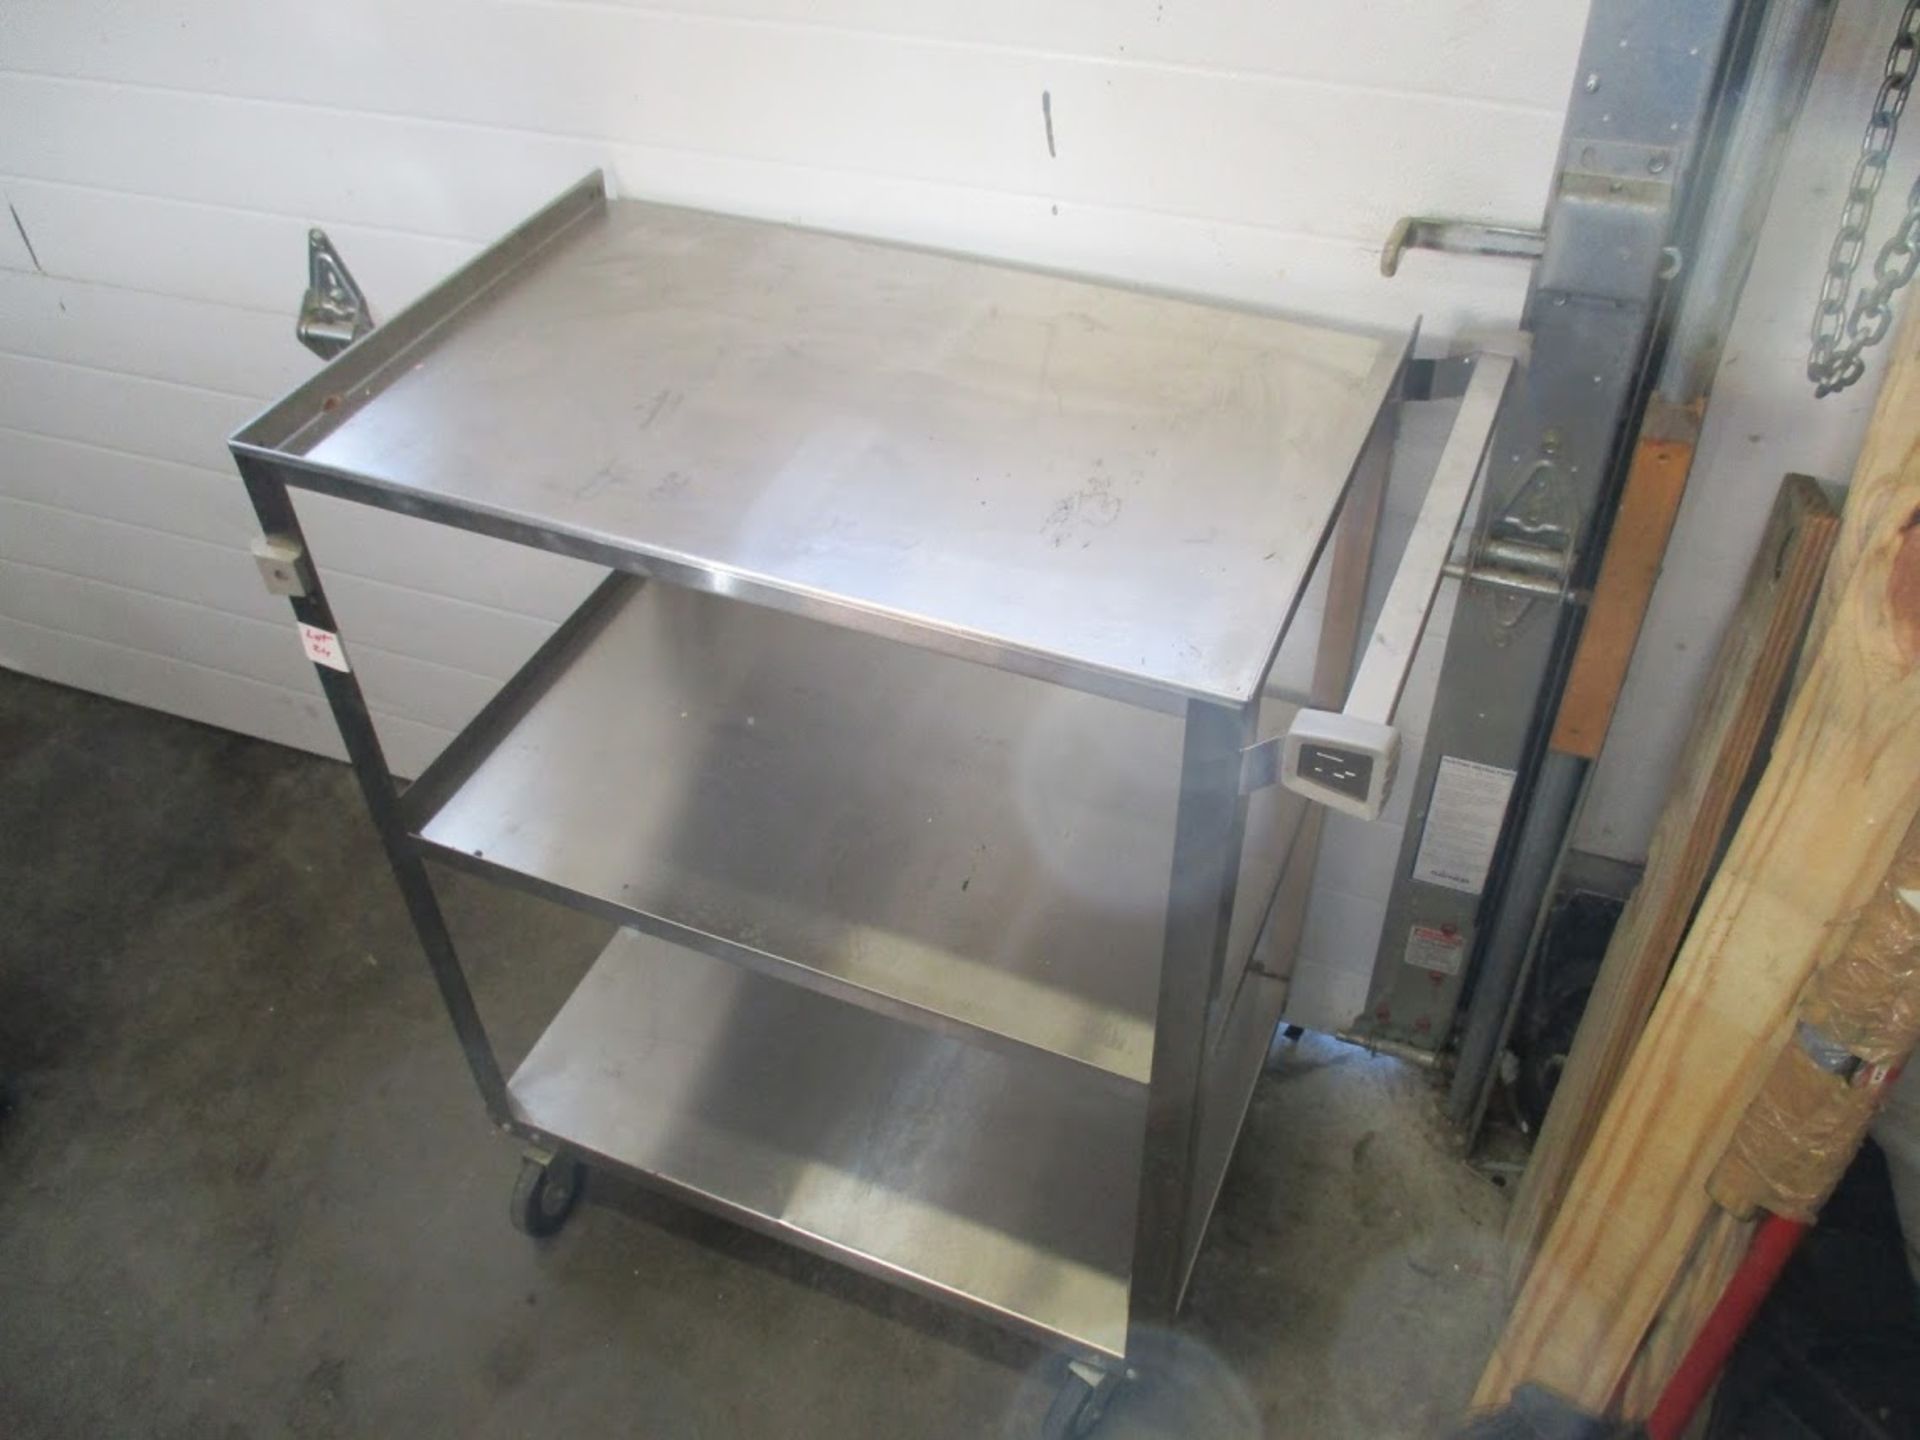 Stainless Steel wheeled medical cart with shelves.